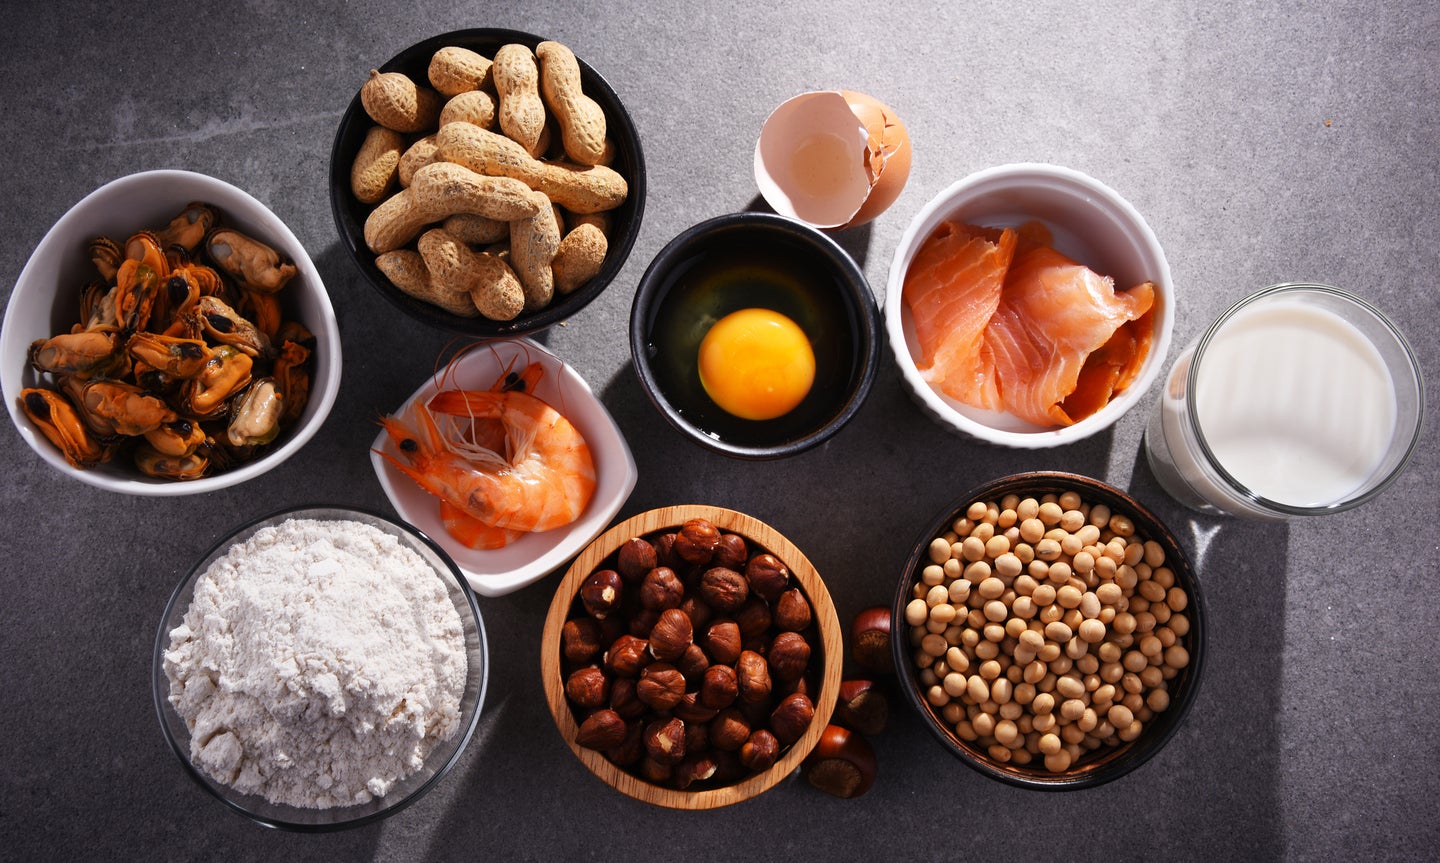 bowls containing wheat flour, eggs, shellfish, peanuts, soybeans, and other common allergens